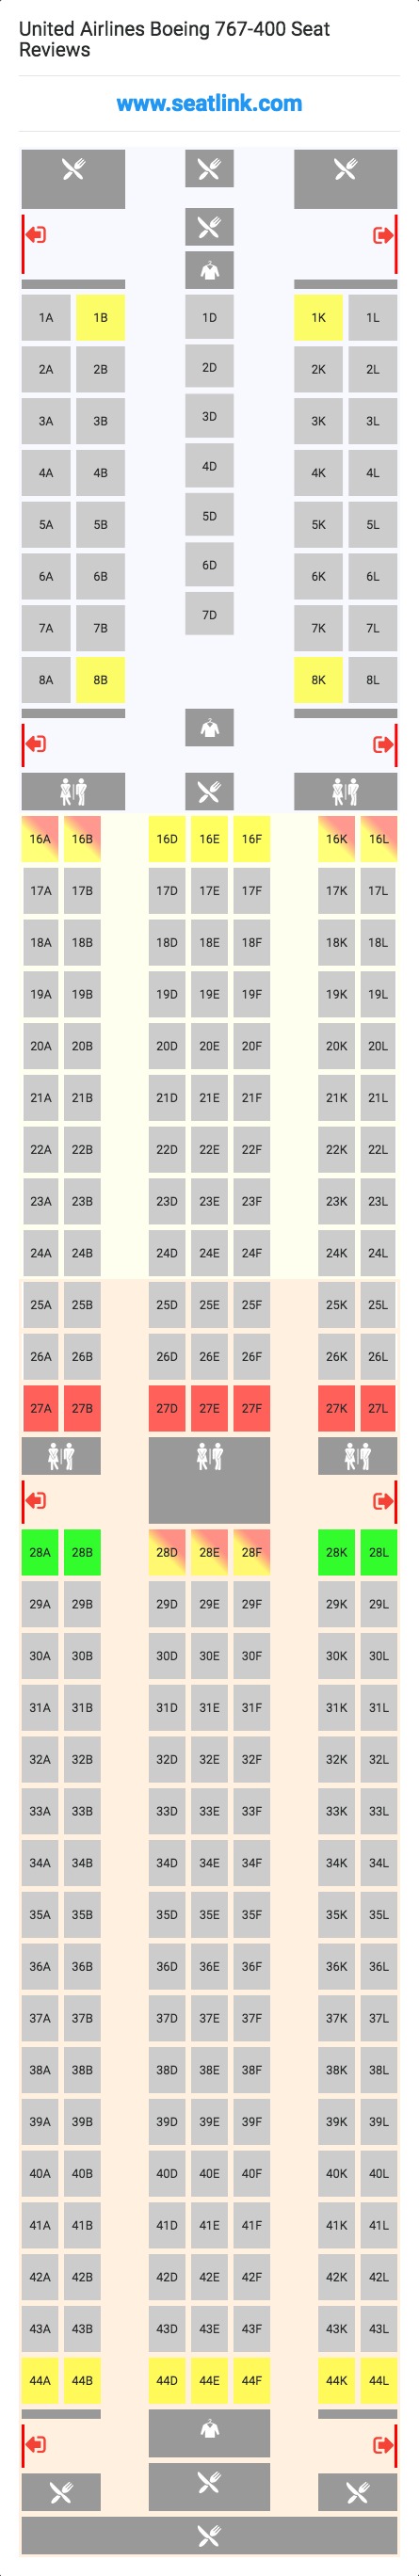 United Airlines Boeing 767-400 (764) Seat Map